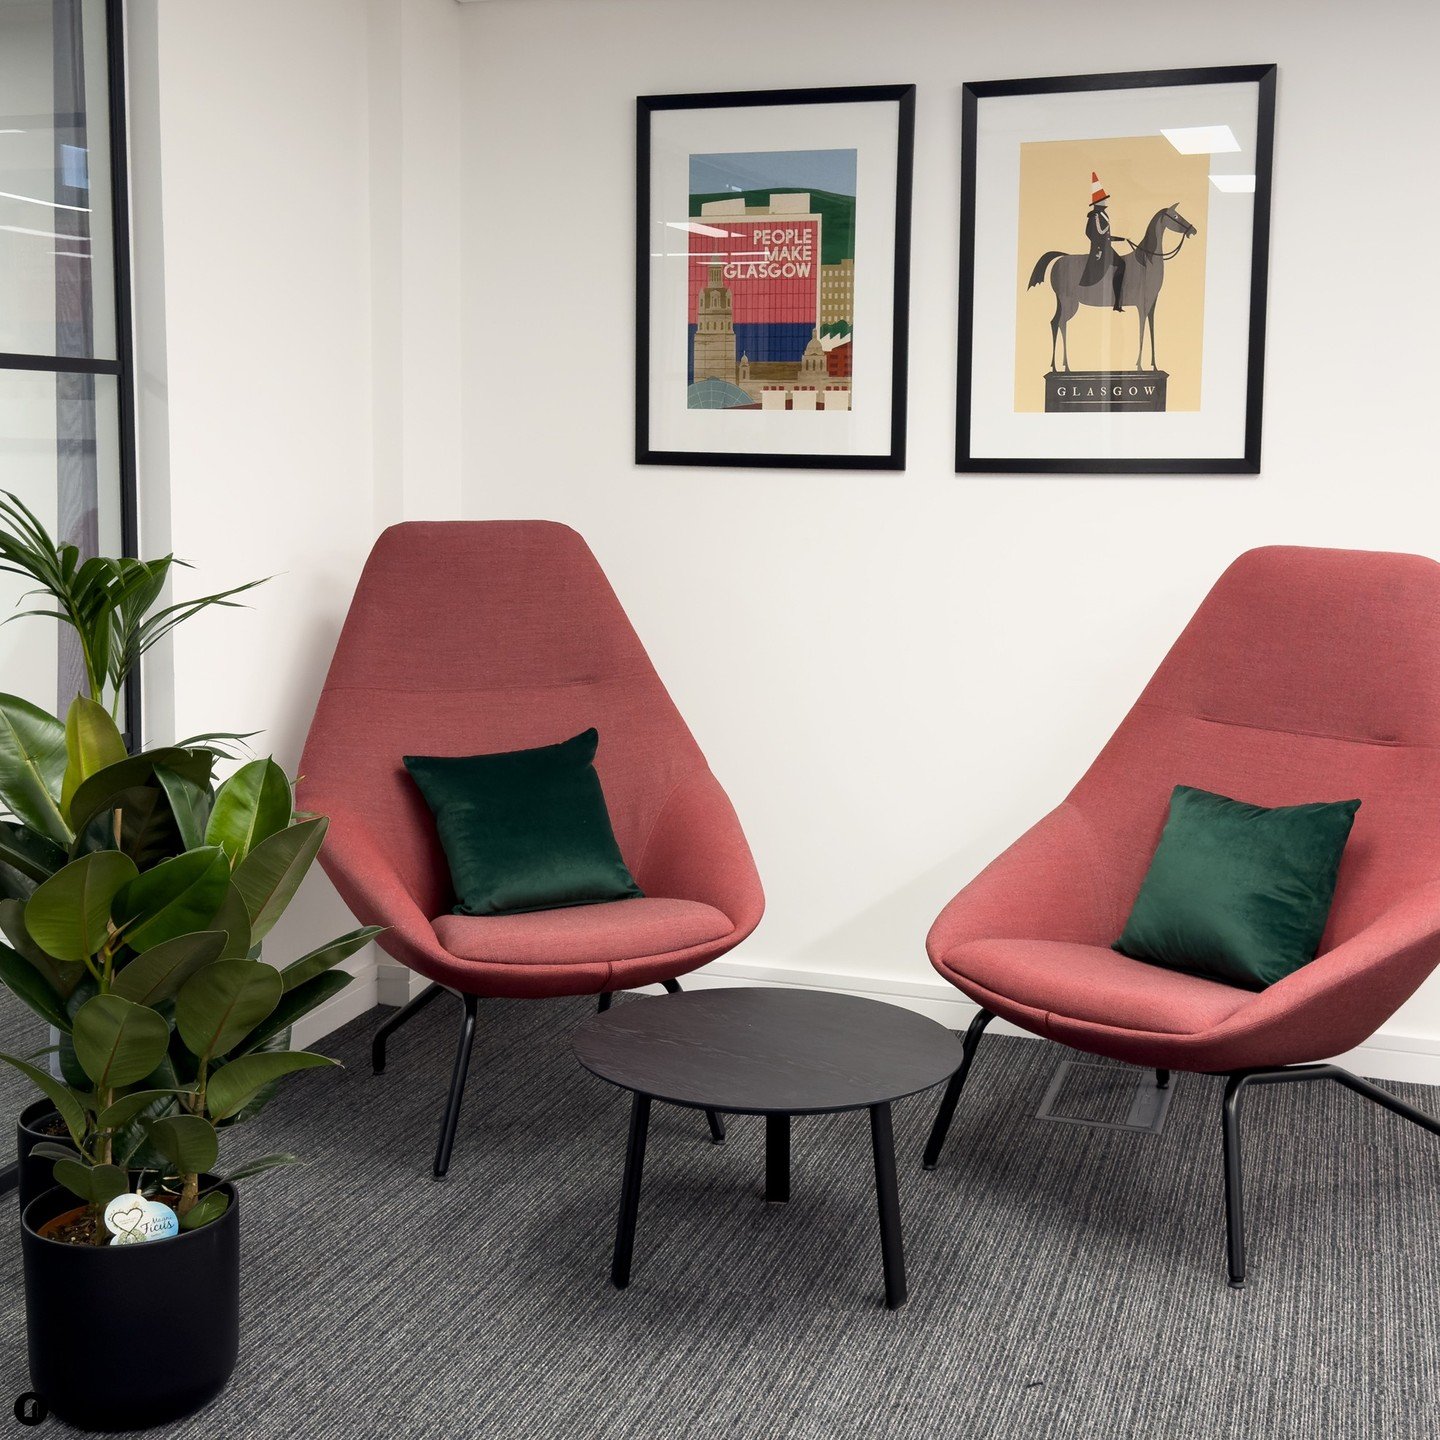 On West George Street, Glasgow, Arch Interiors dressed up the recently renovated office spaces.

🖼️ We've filled the space with beautiful art from local artists, bringing the essence of Glasgow's culture to the walls. Our careful selection extends t